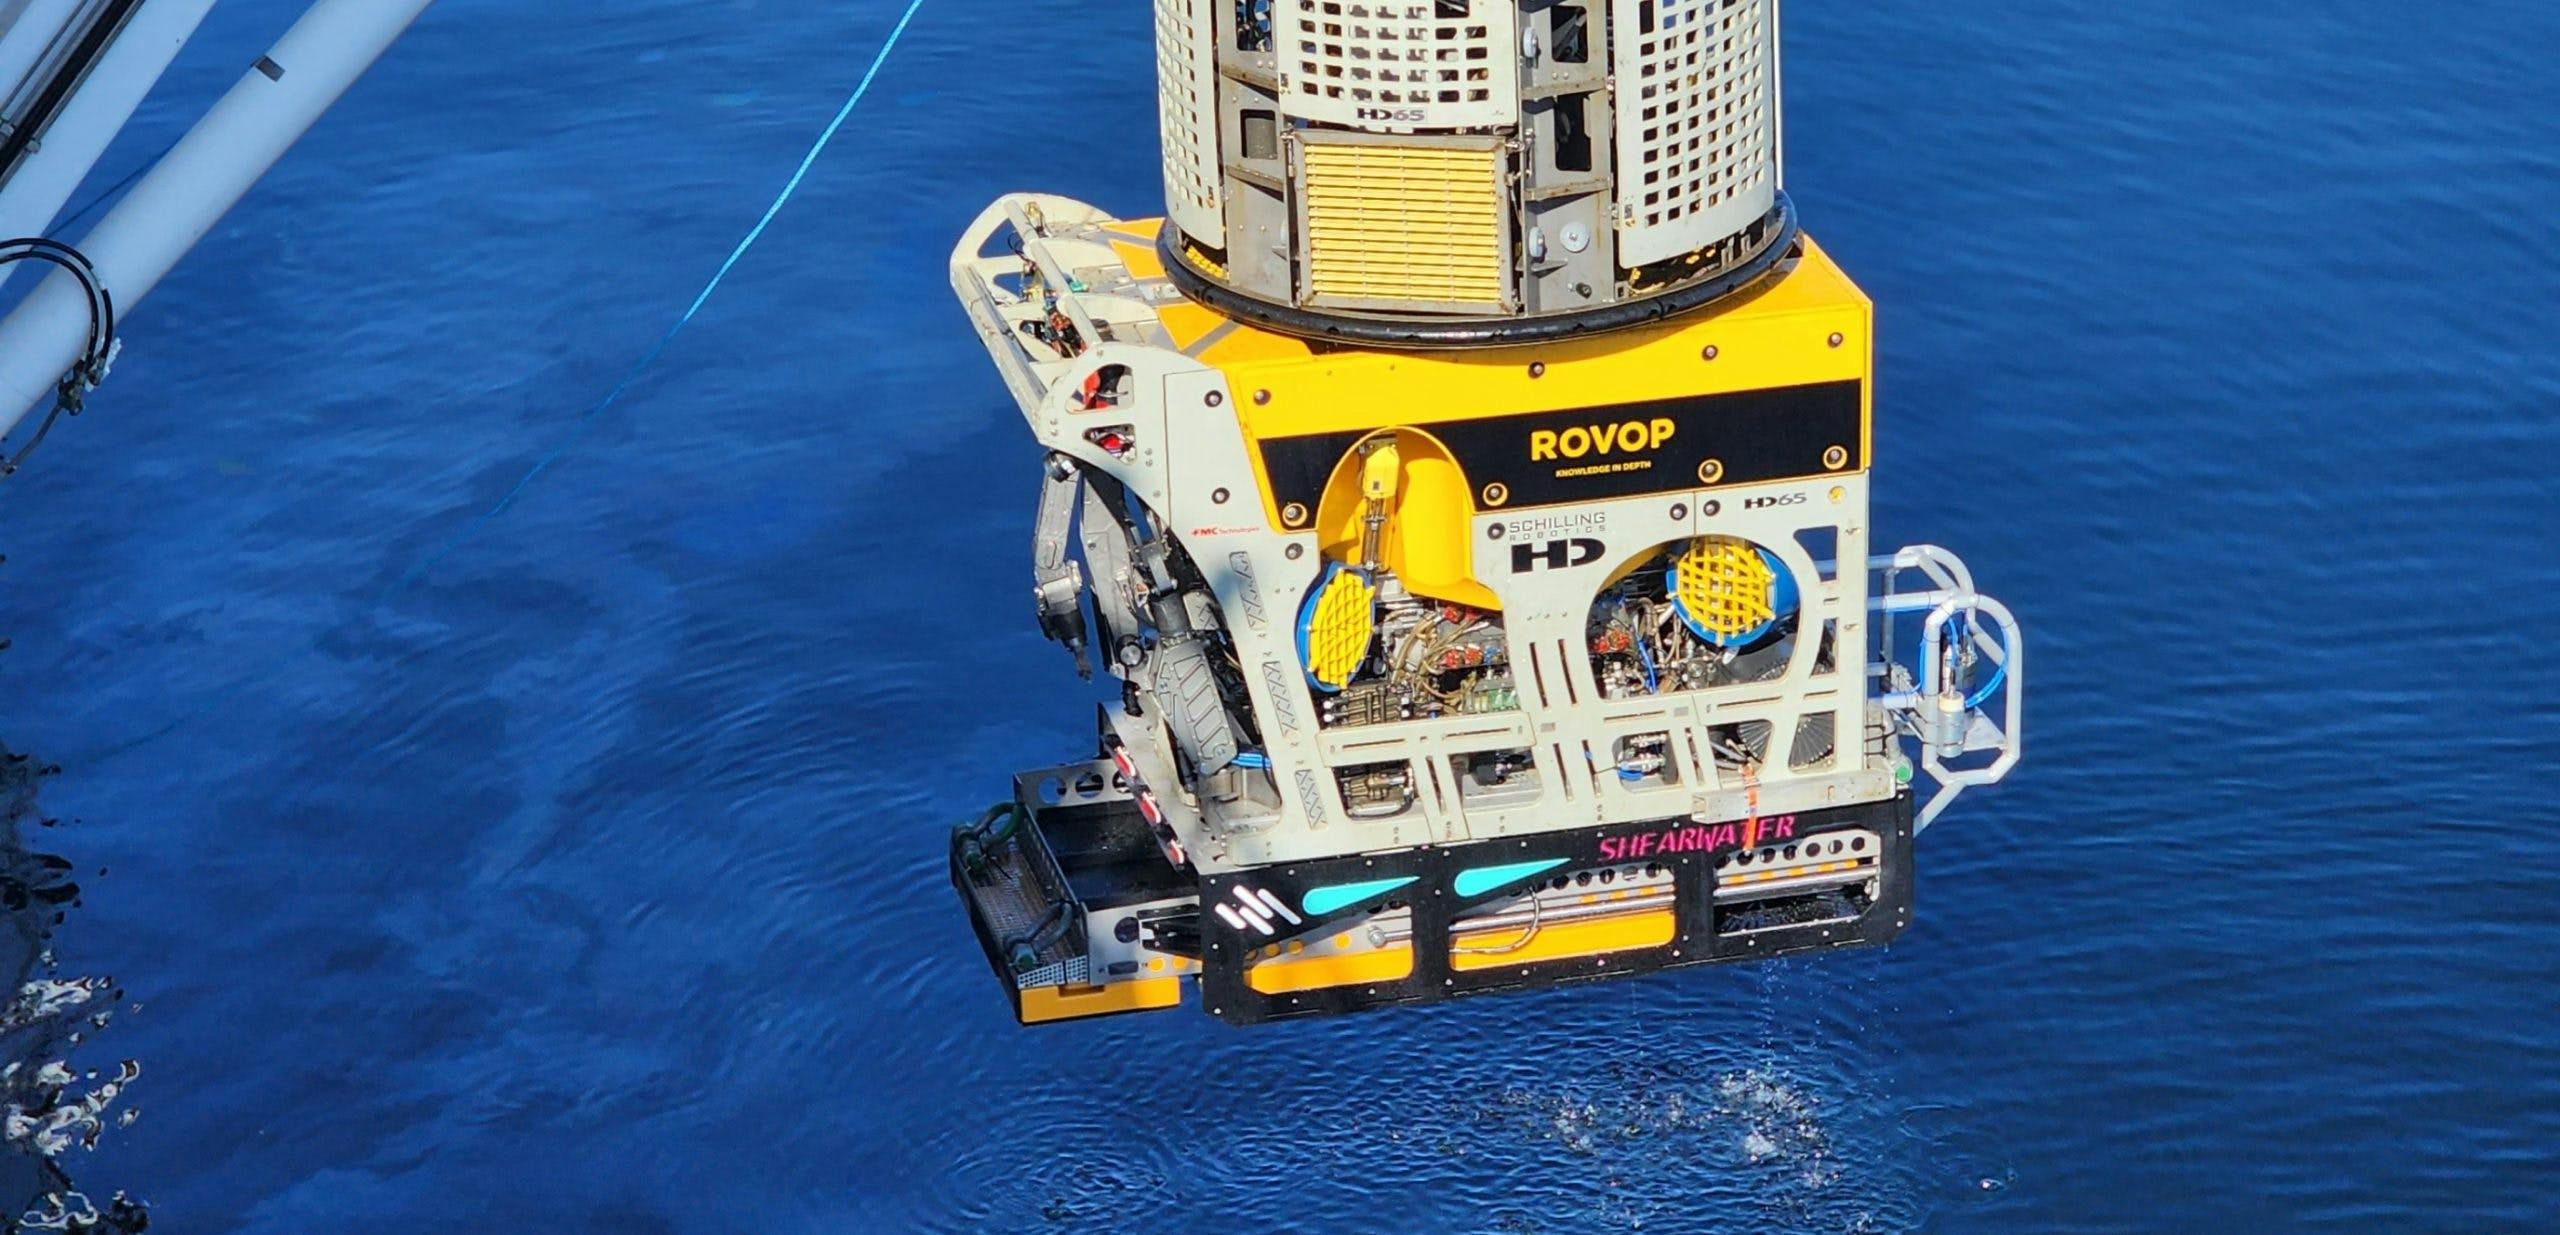 With Pearl nodes, Shearwater says users get up to six times more nodes in a single ROV load and the technology is 30% more time efficient to deploy for 150 continuous recording days.